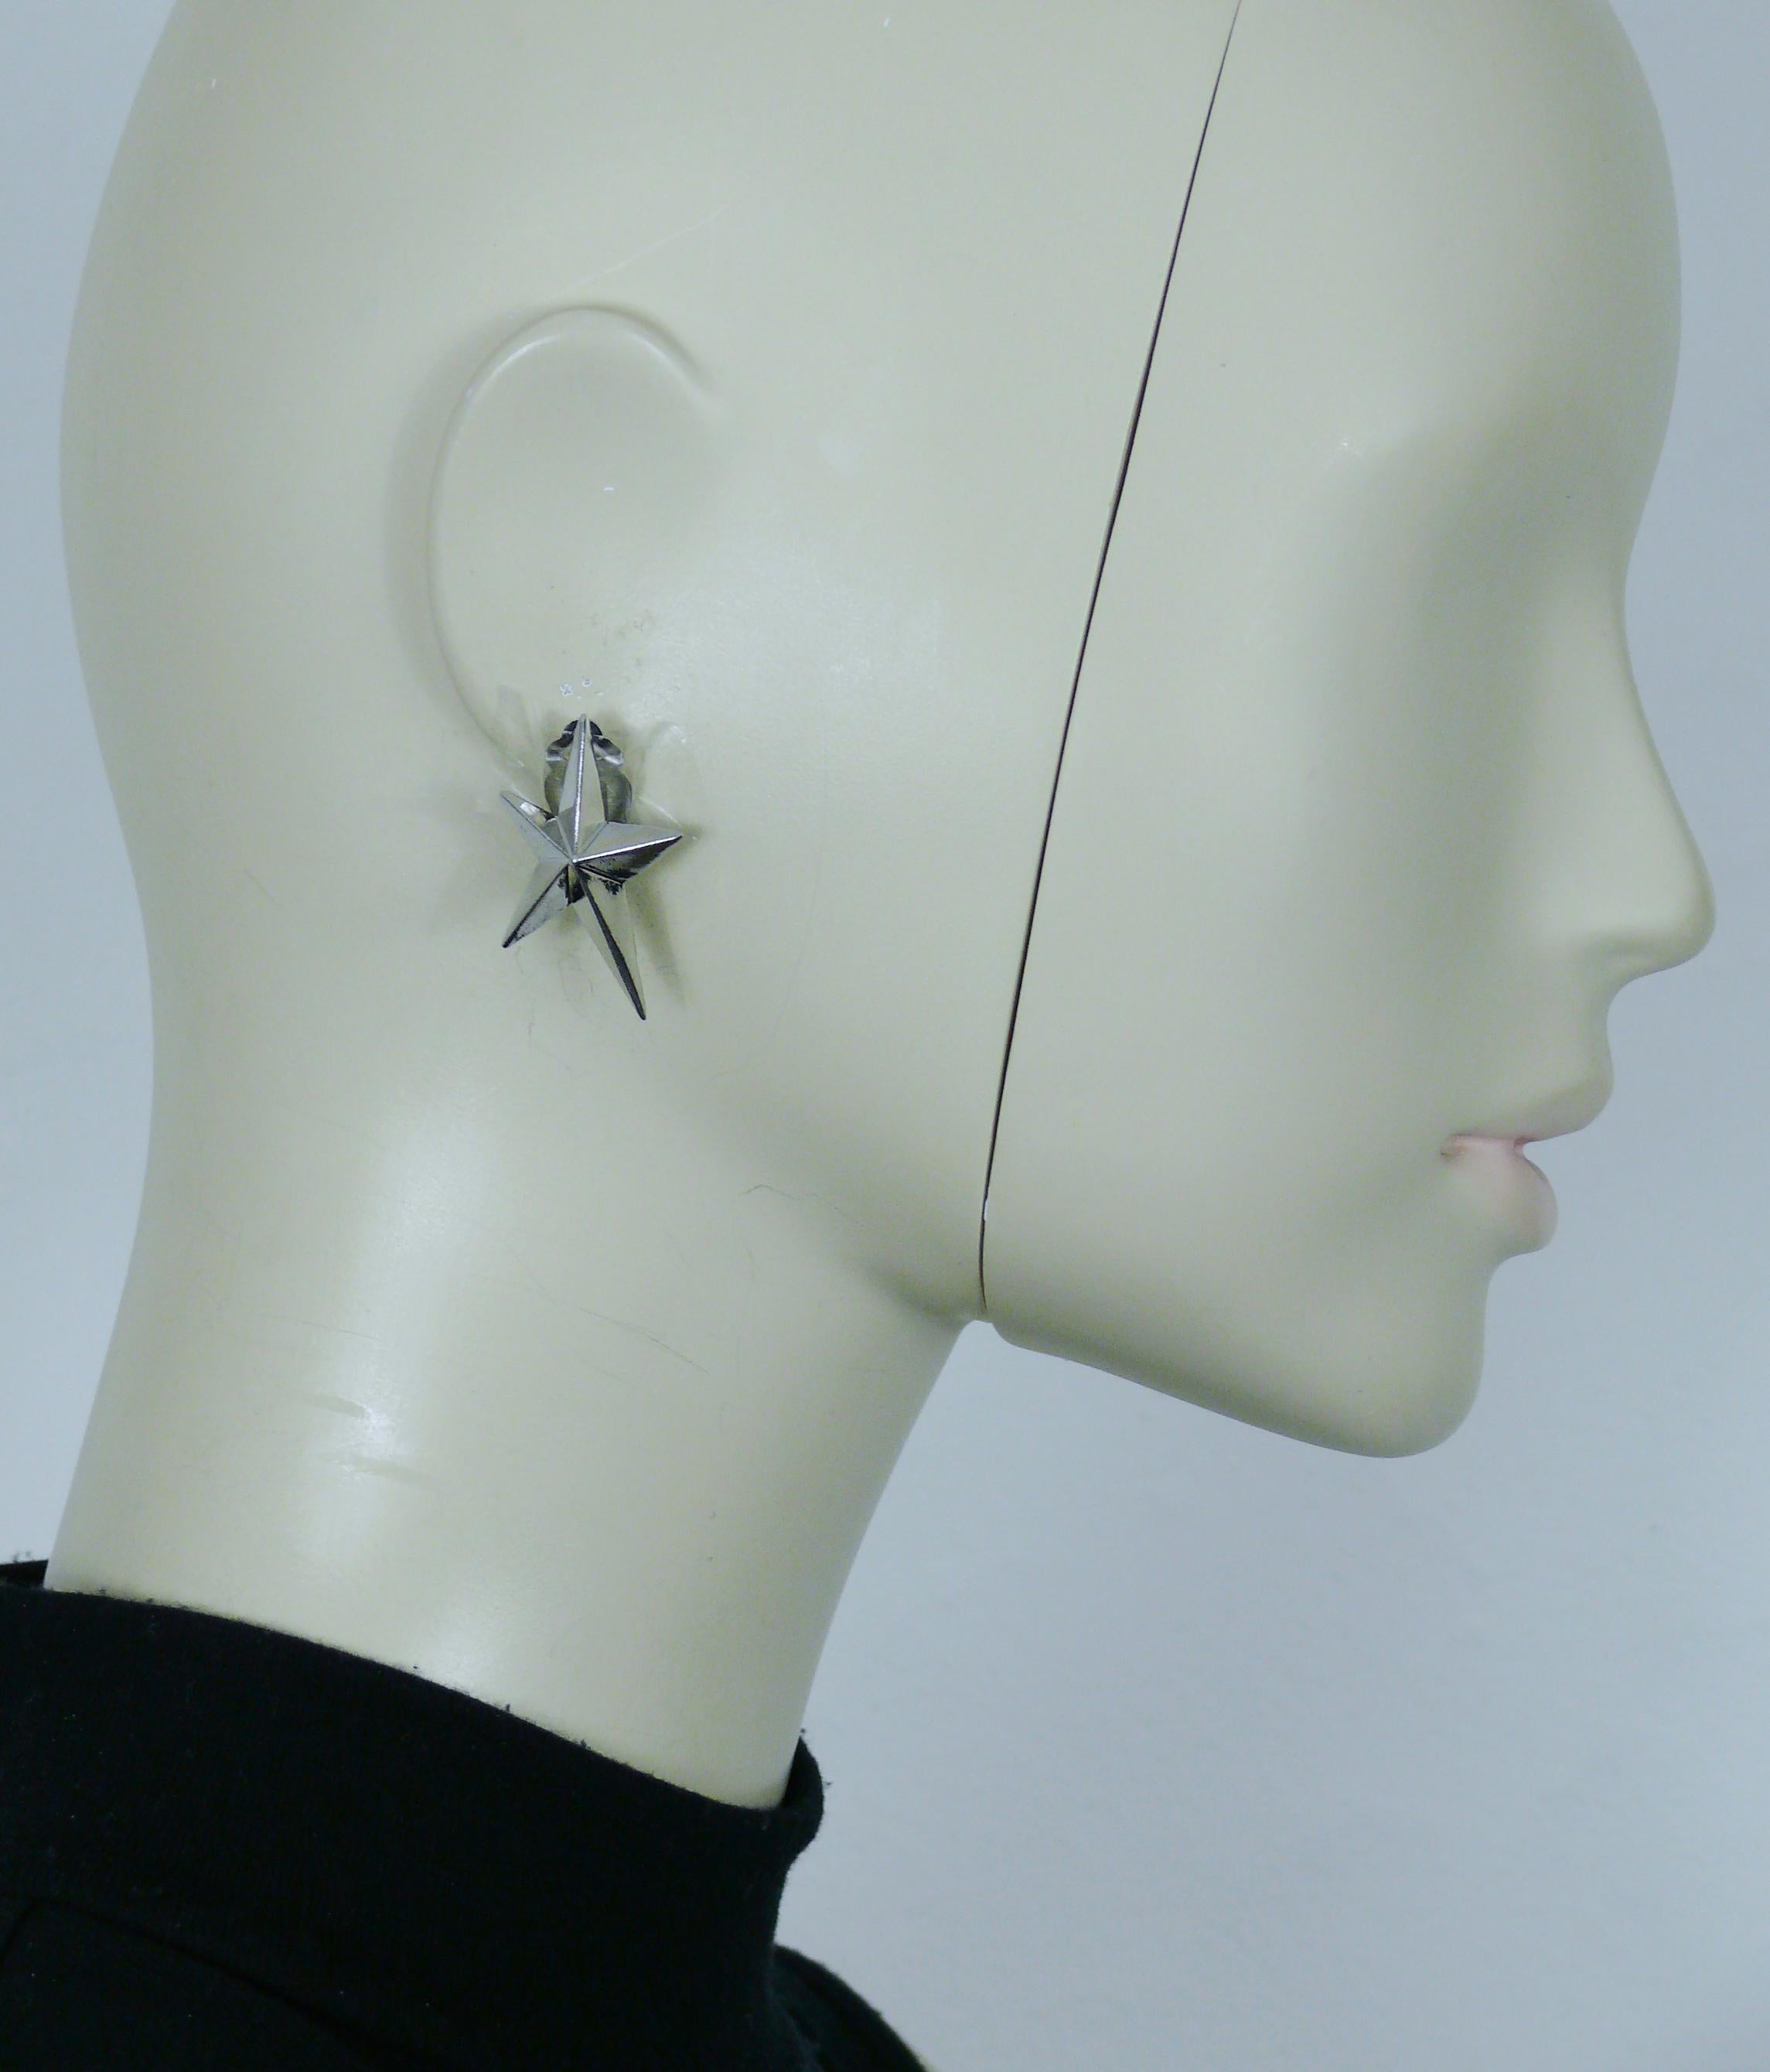 THIERRY MUGLER vintage iconic silver tone star clip-on earrings.

Embossed TM (only on the reverse of one earring).

Indicative measurements : max. height approx. 3.5 cm (1.38 inches) / max. width approx. 2 cm (0.79 inch).

Weight per earring :